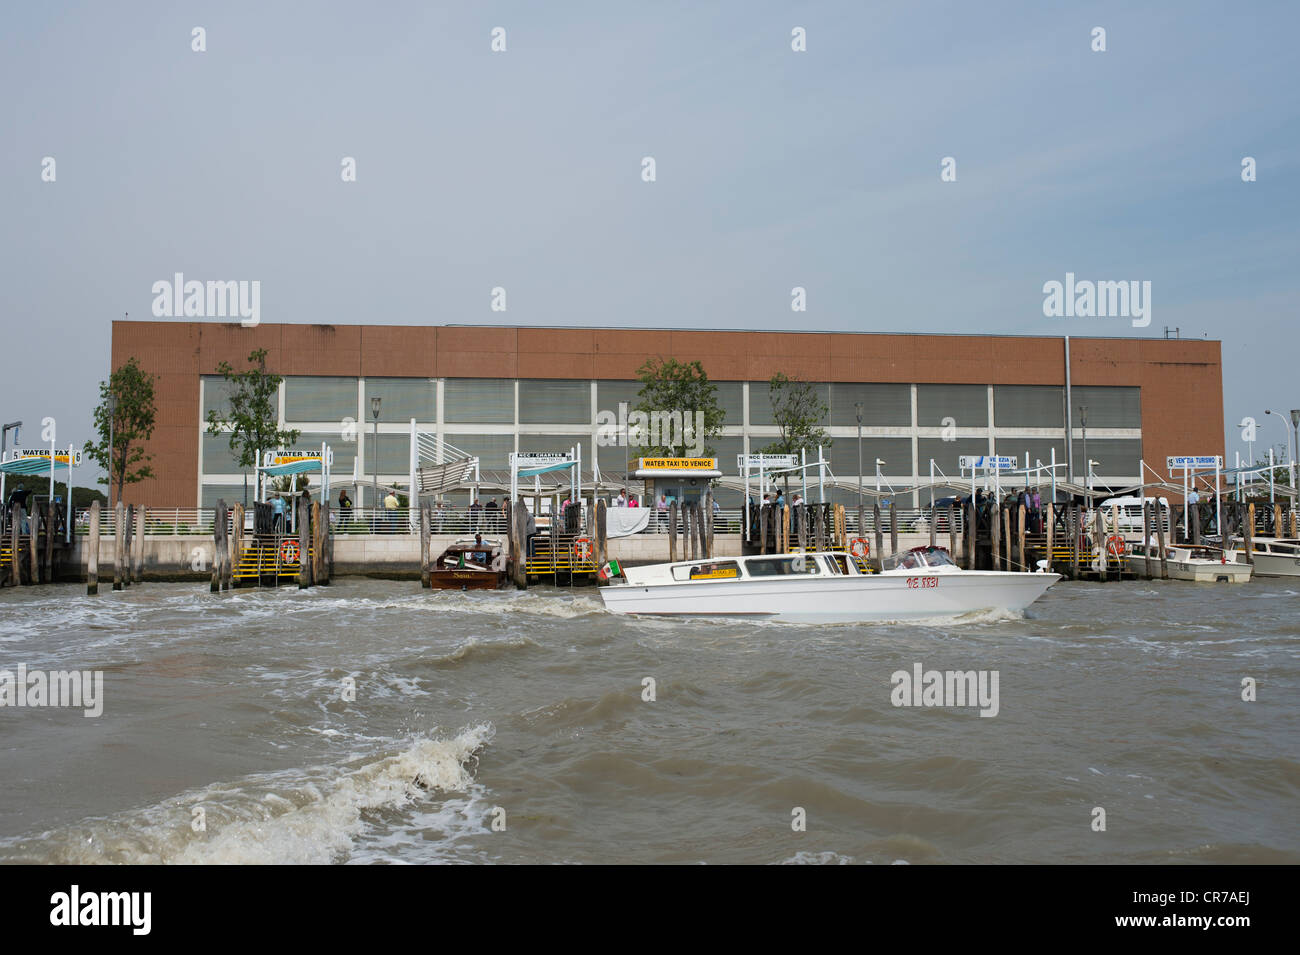 Venice Airport High Resolution Stock Photography and Images - Alamy